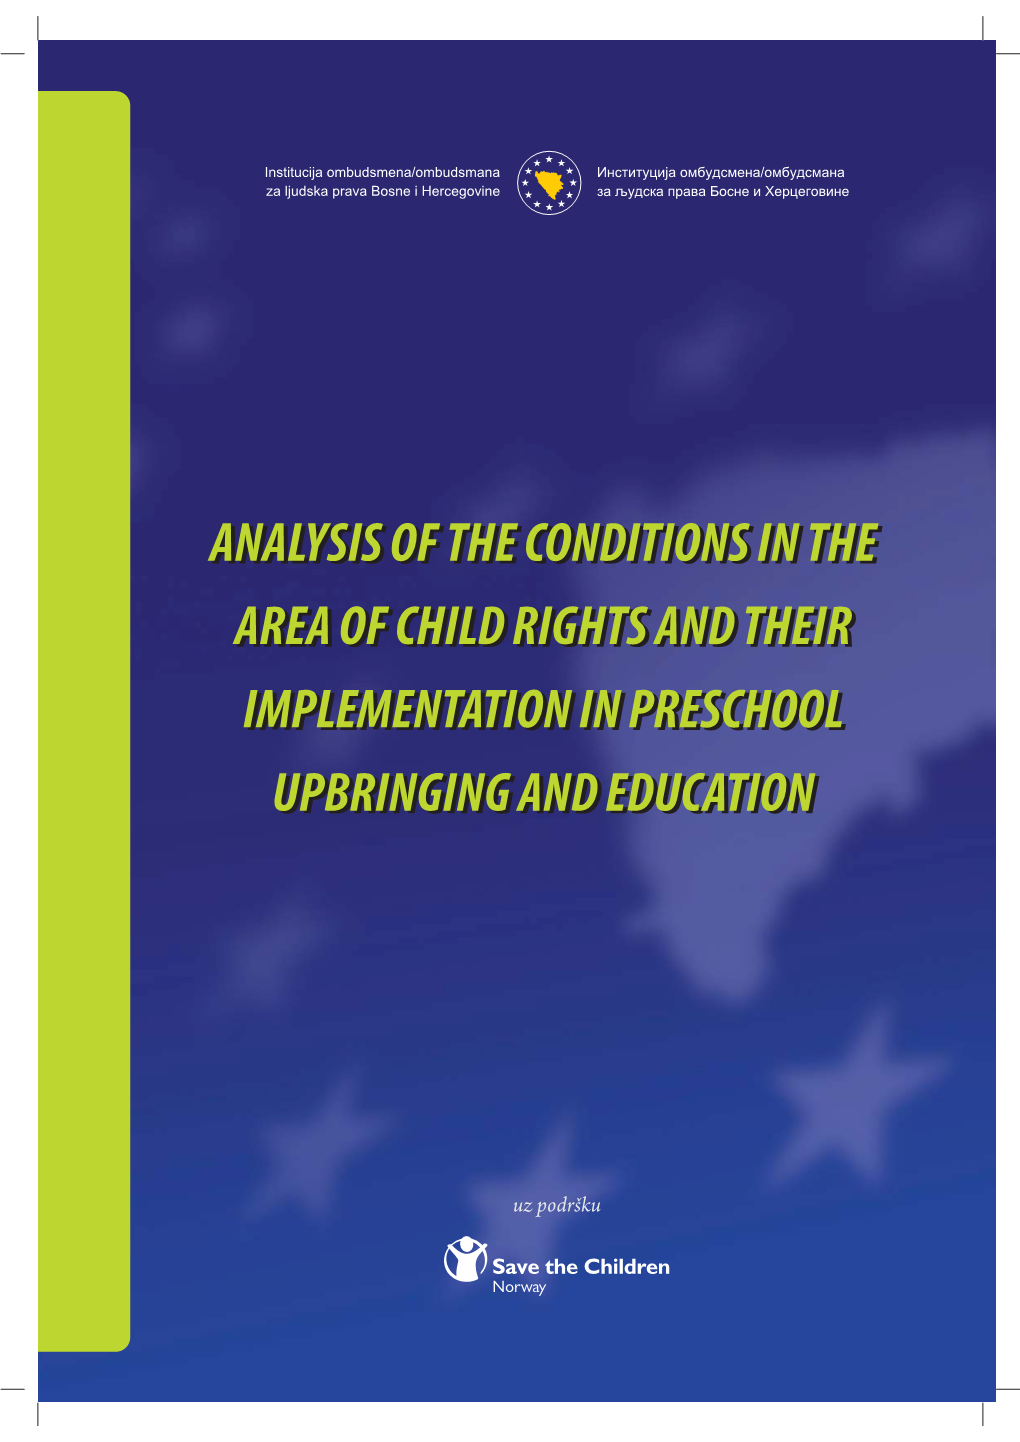 Analysis of the Conditions in the Area of Child Rights and Their